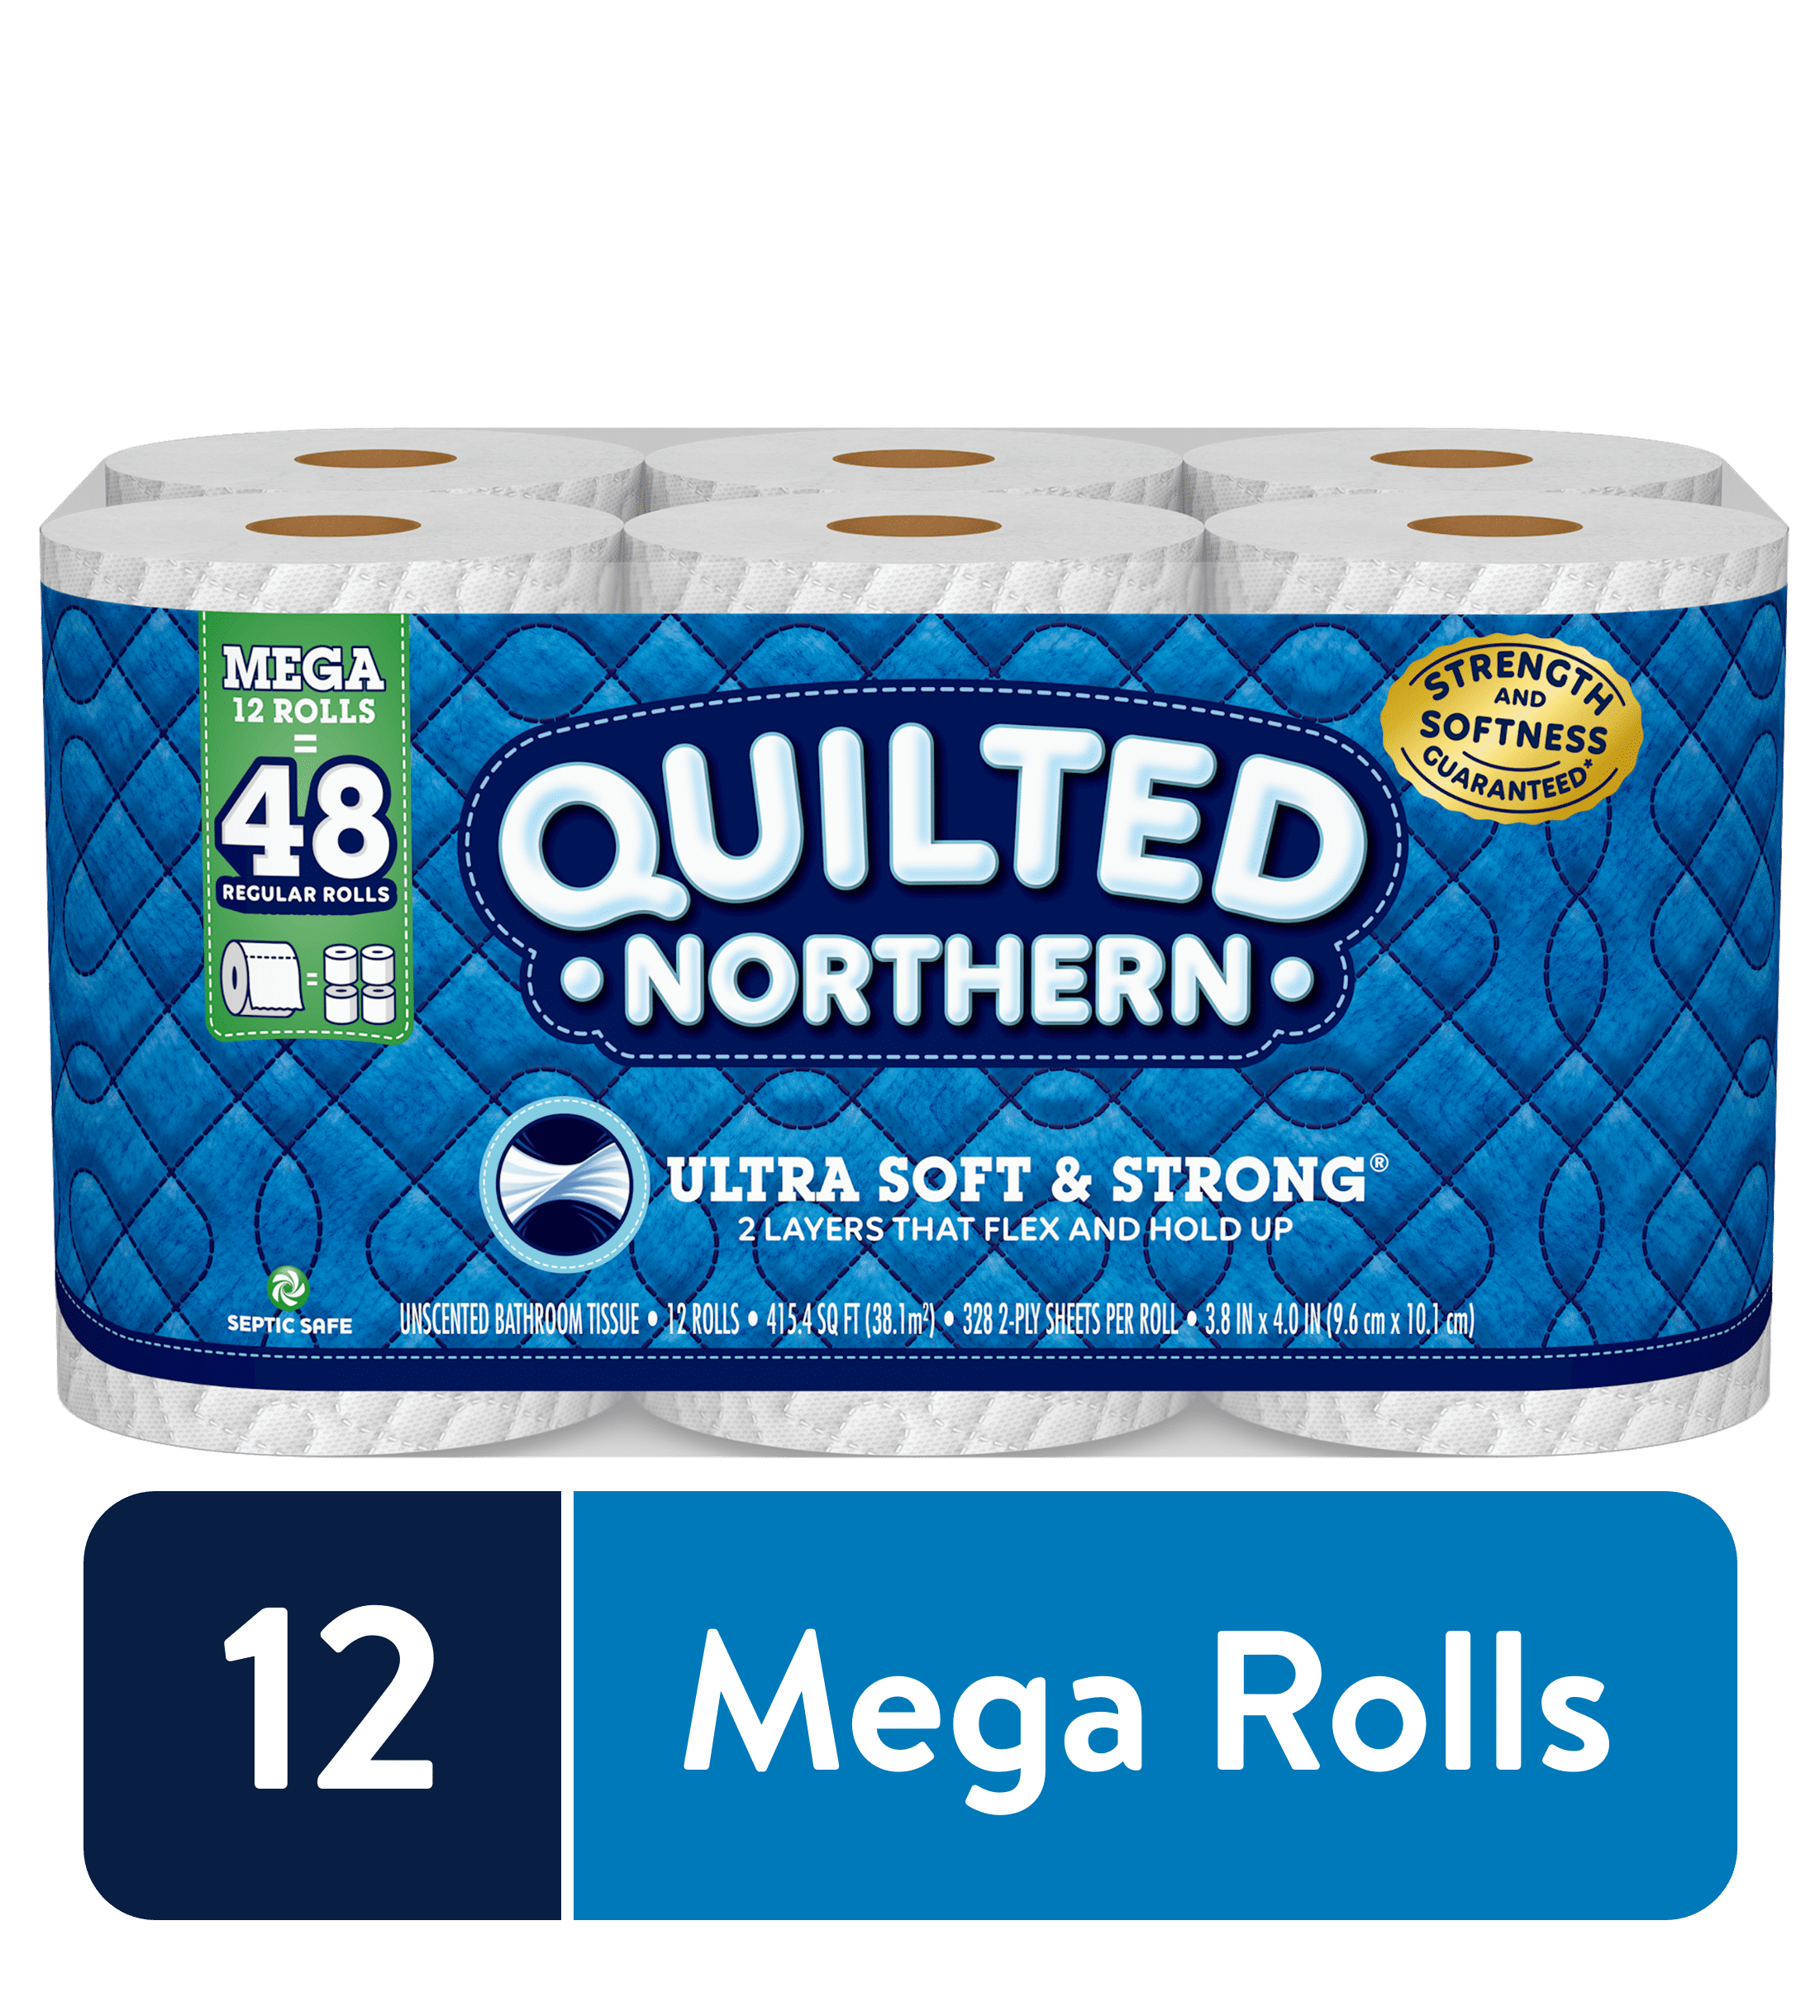 Details about   Quilted Northern Ultra Plush Toilet Paper 12 Mega Rolls = 48 Regular Rolls 